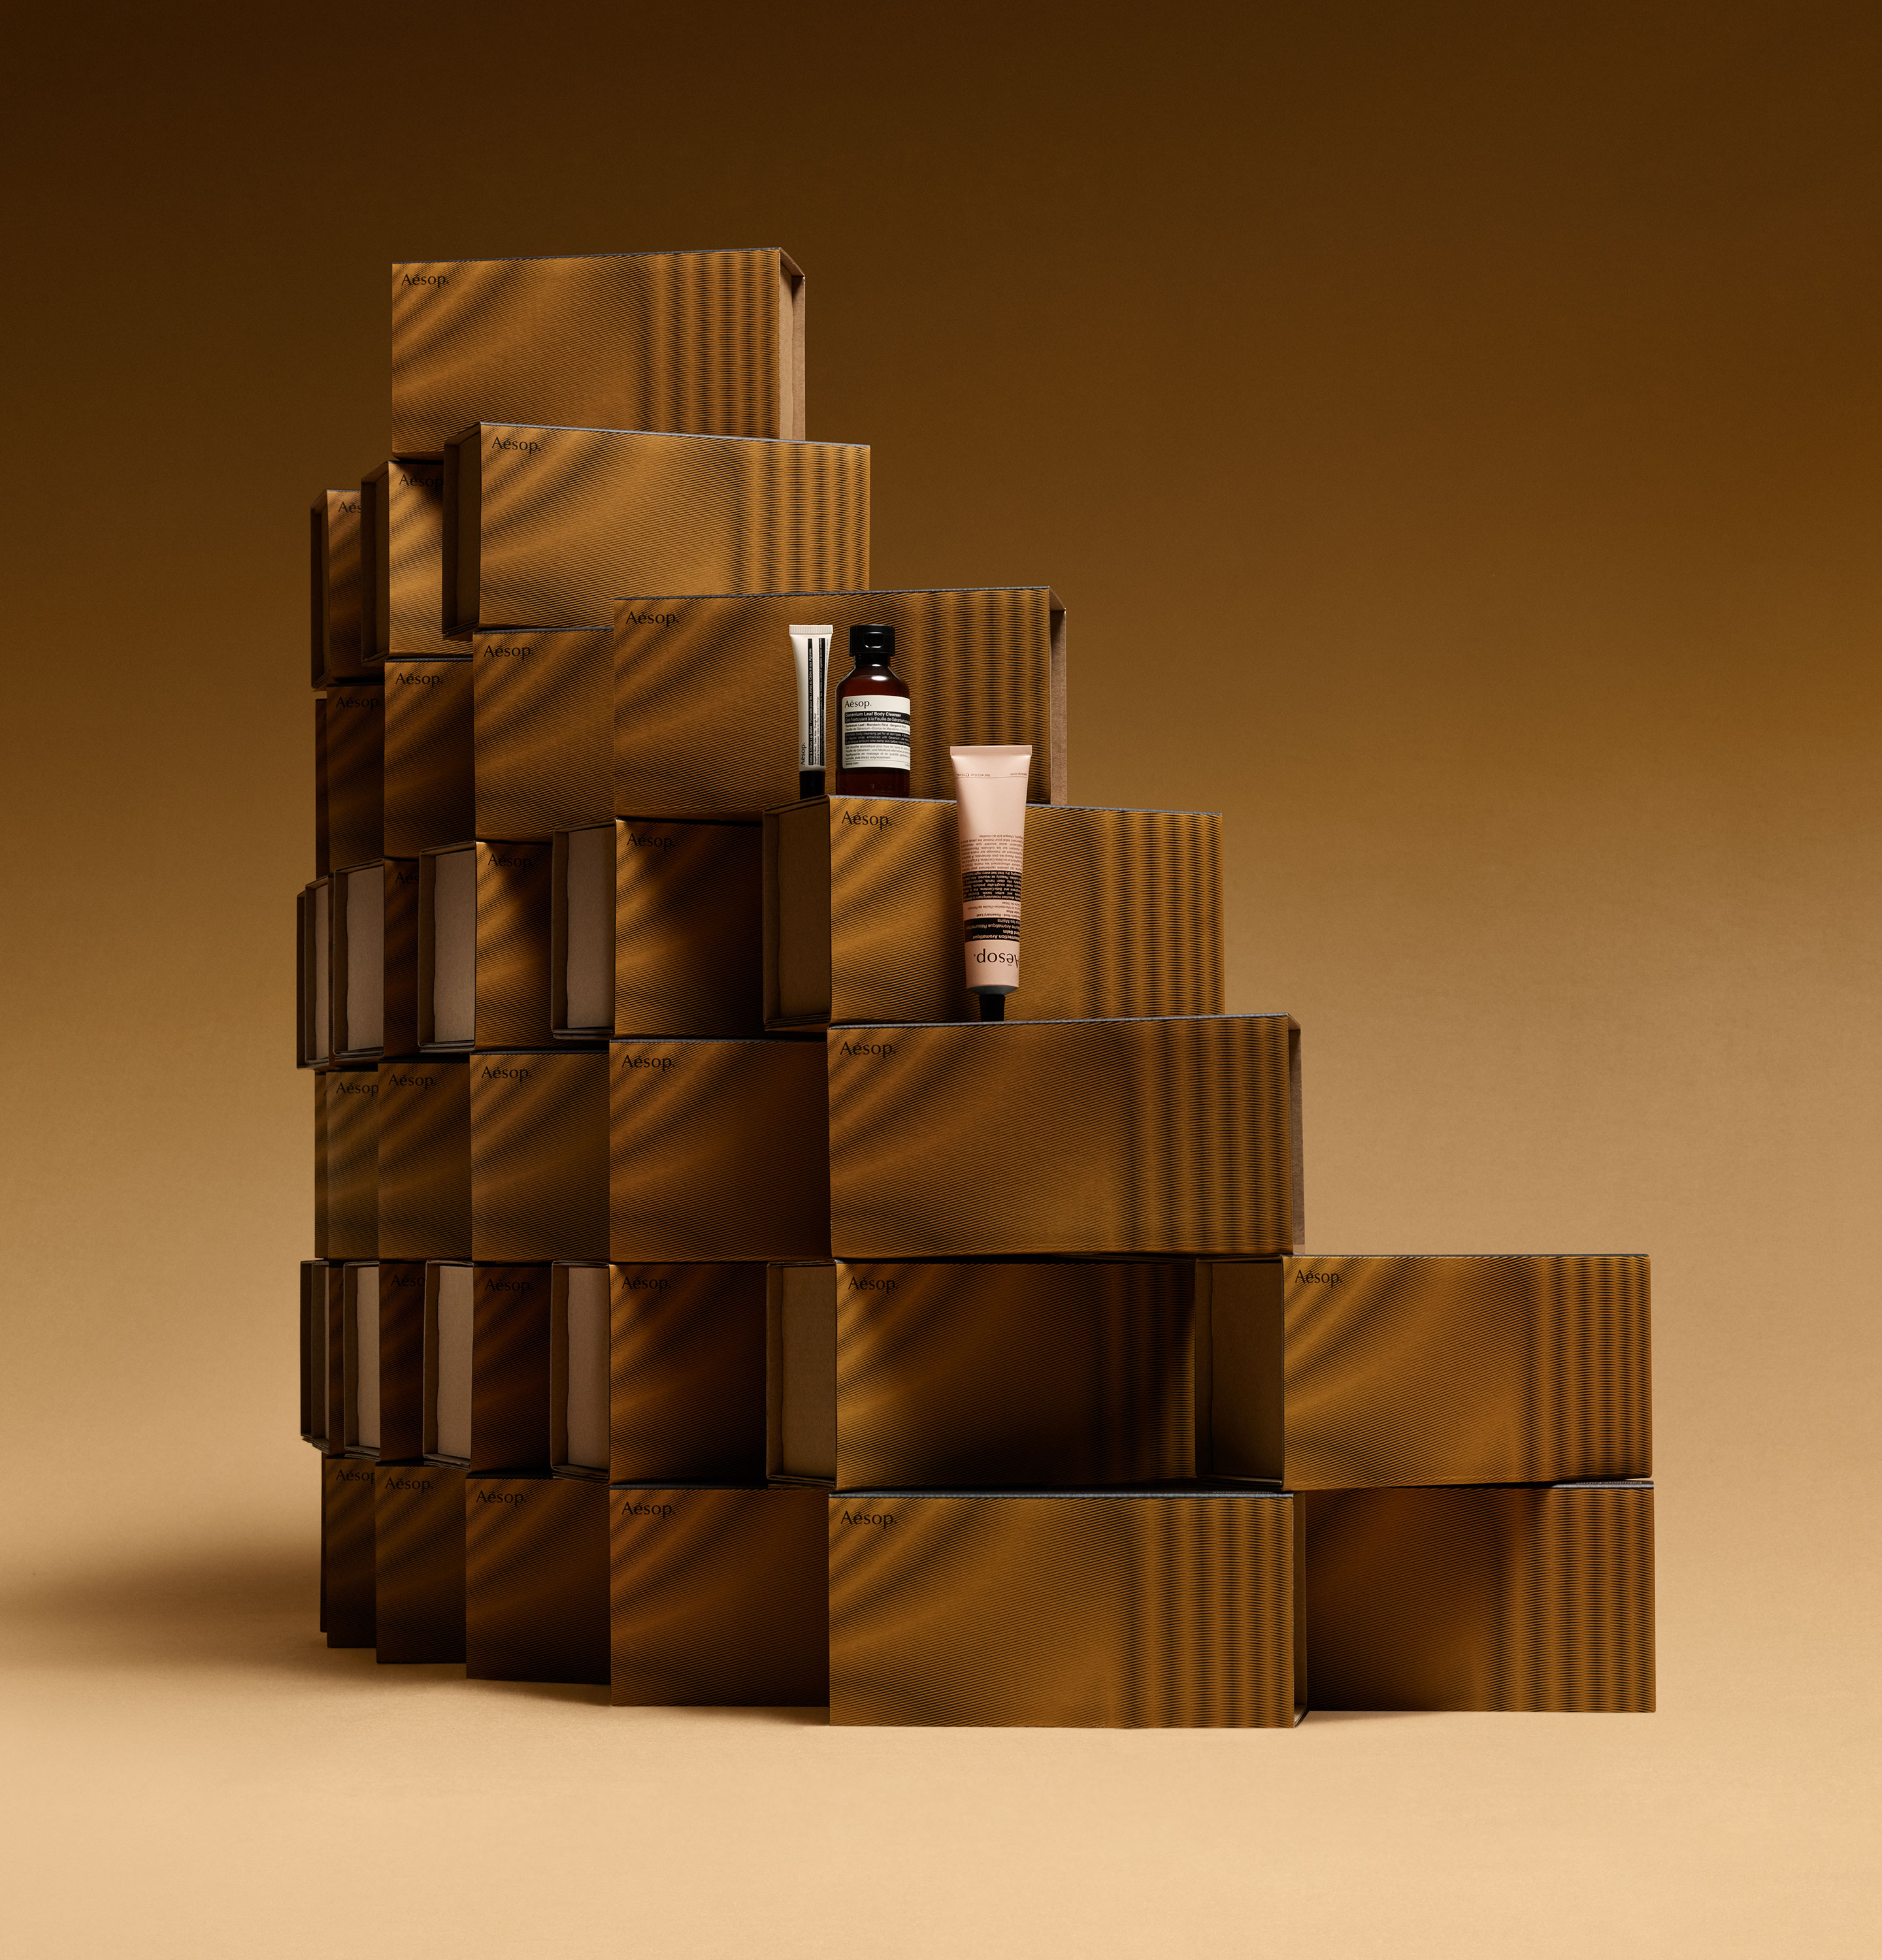 Aesop products placed on stacked brown cardboard boxes